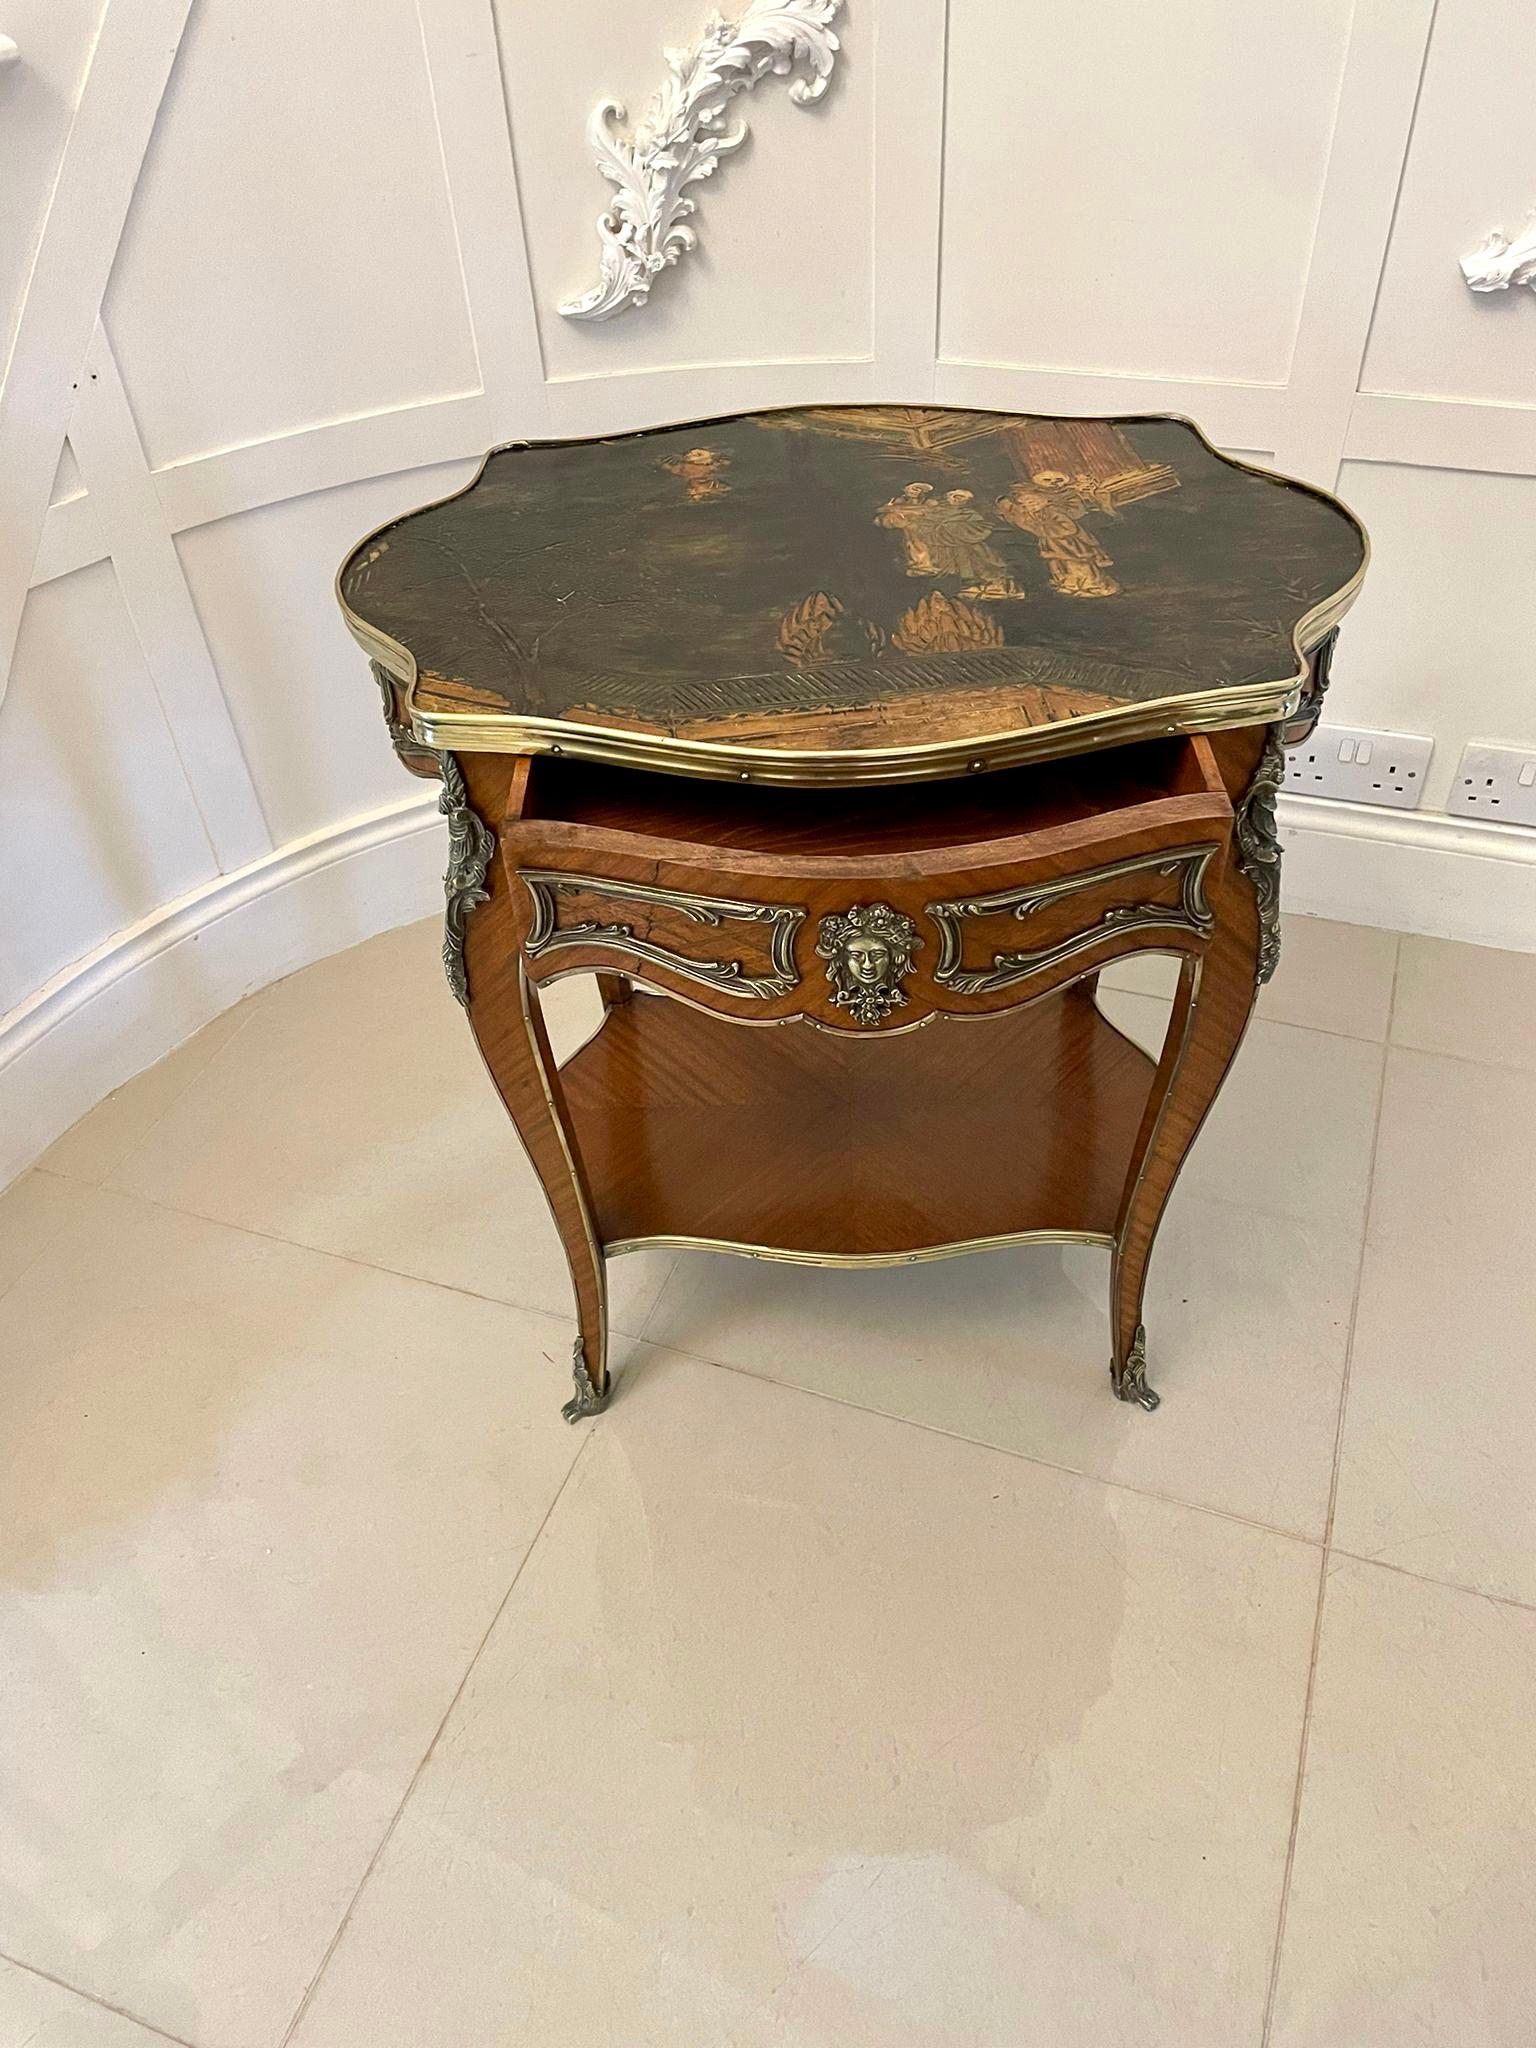 Outstanding Antique French Kingwood and Ormolu Mounted Freestanding Centre Table In Good Condition For Sale In Suffolk, GB